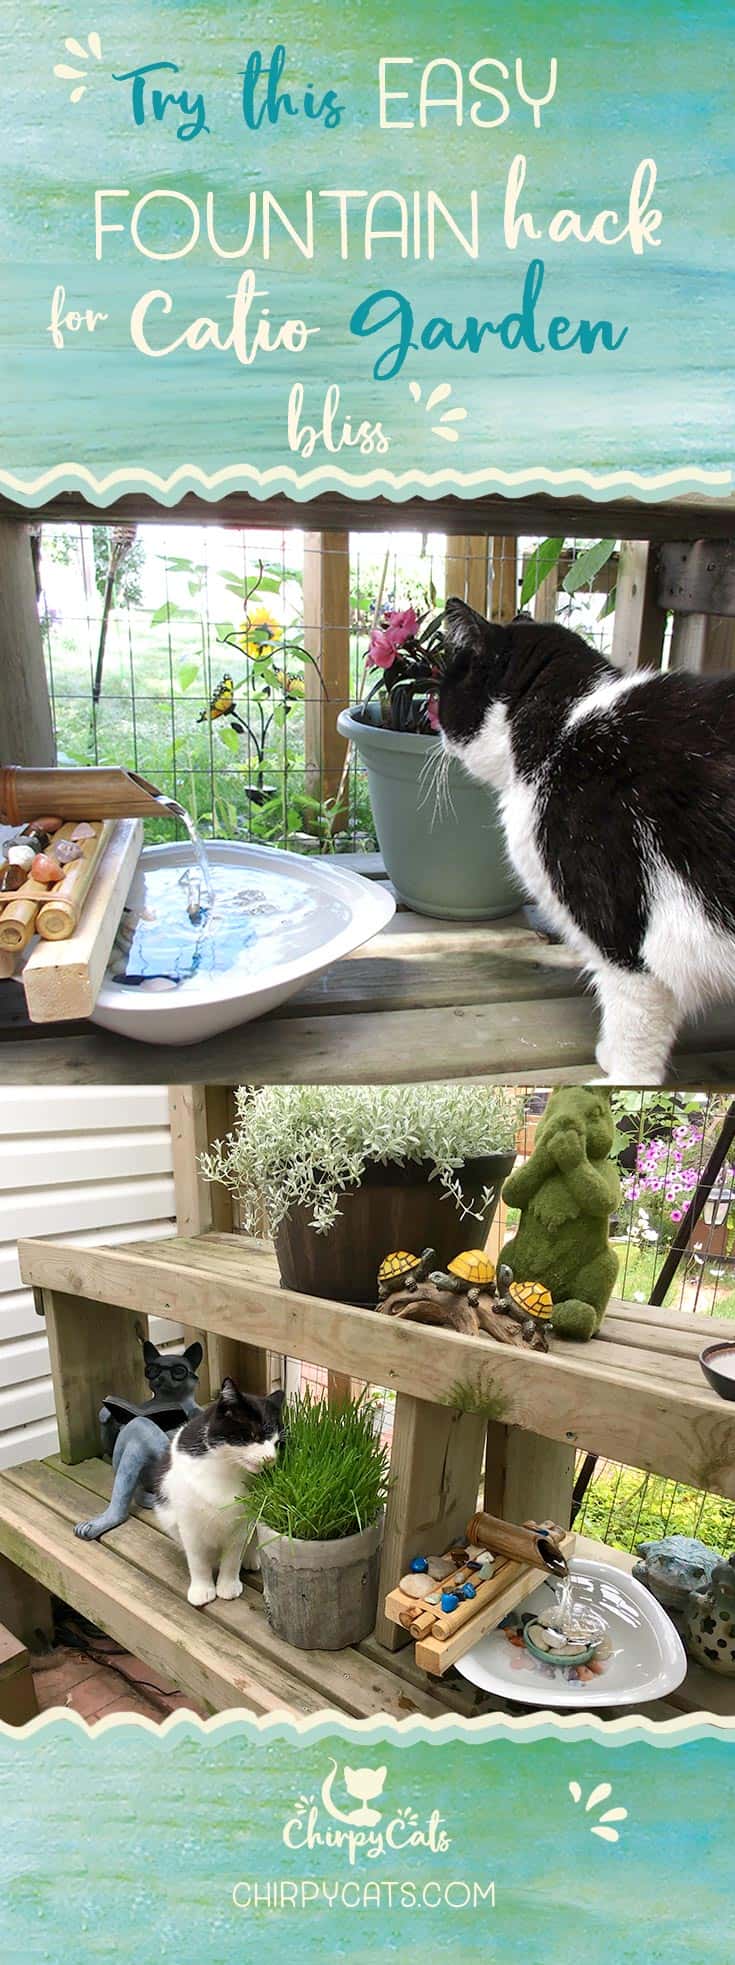 For ultimate catio 'zen' try this easy fountain hack for you and your cats to enjoy!